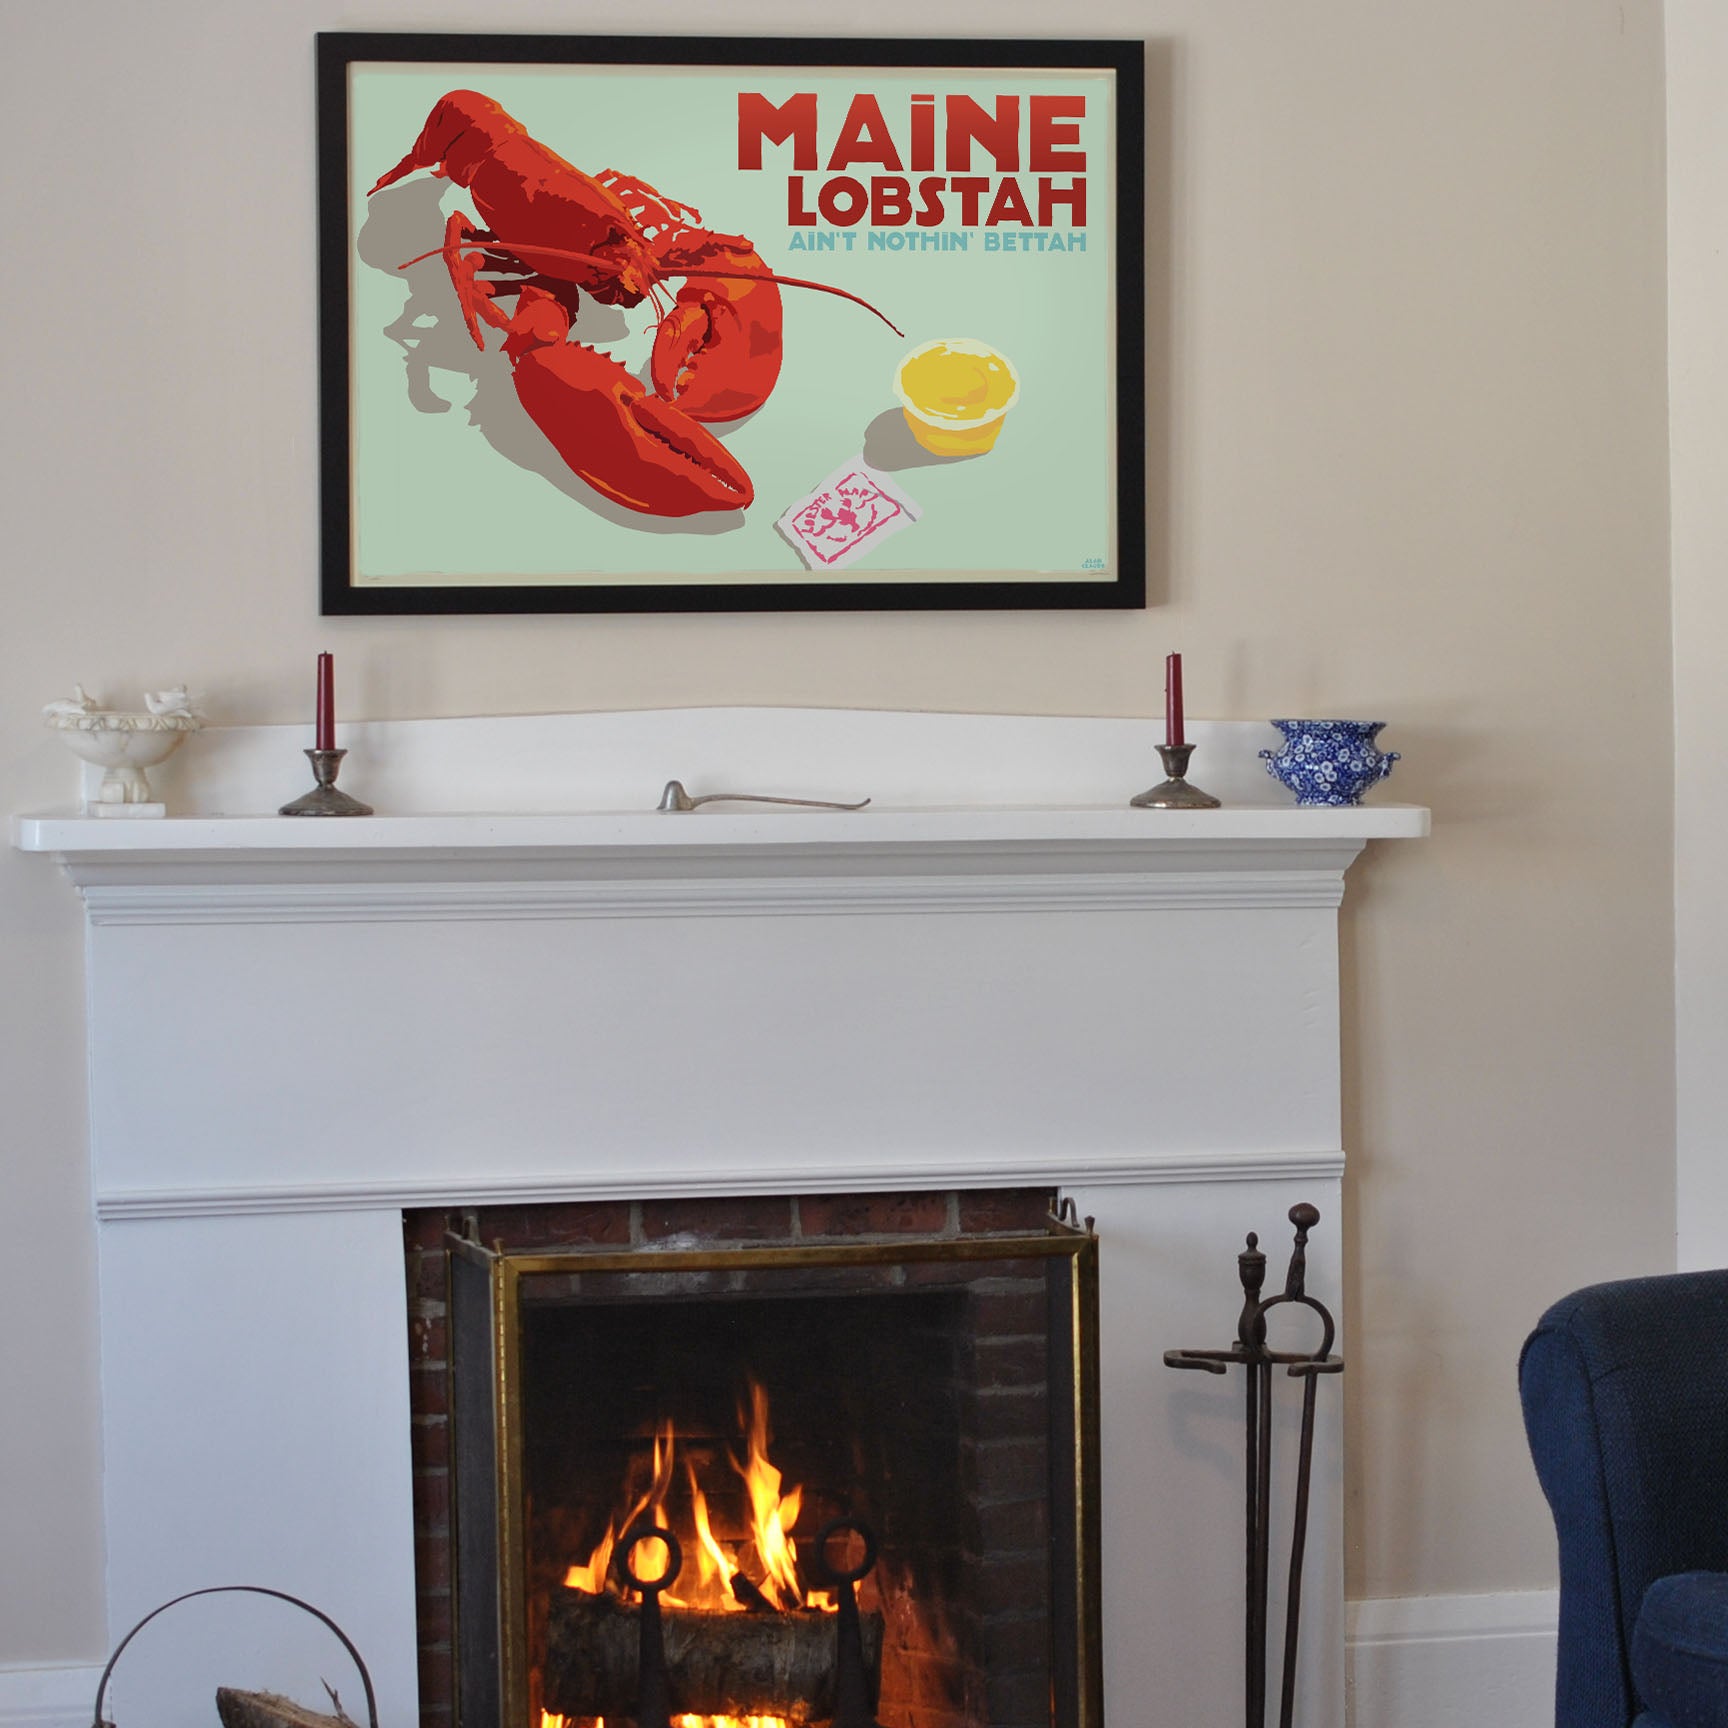 Maine Lobstah With Butter Art Print 24" x 36" Horizontal Framed Wall Poster By Alan Claude